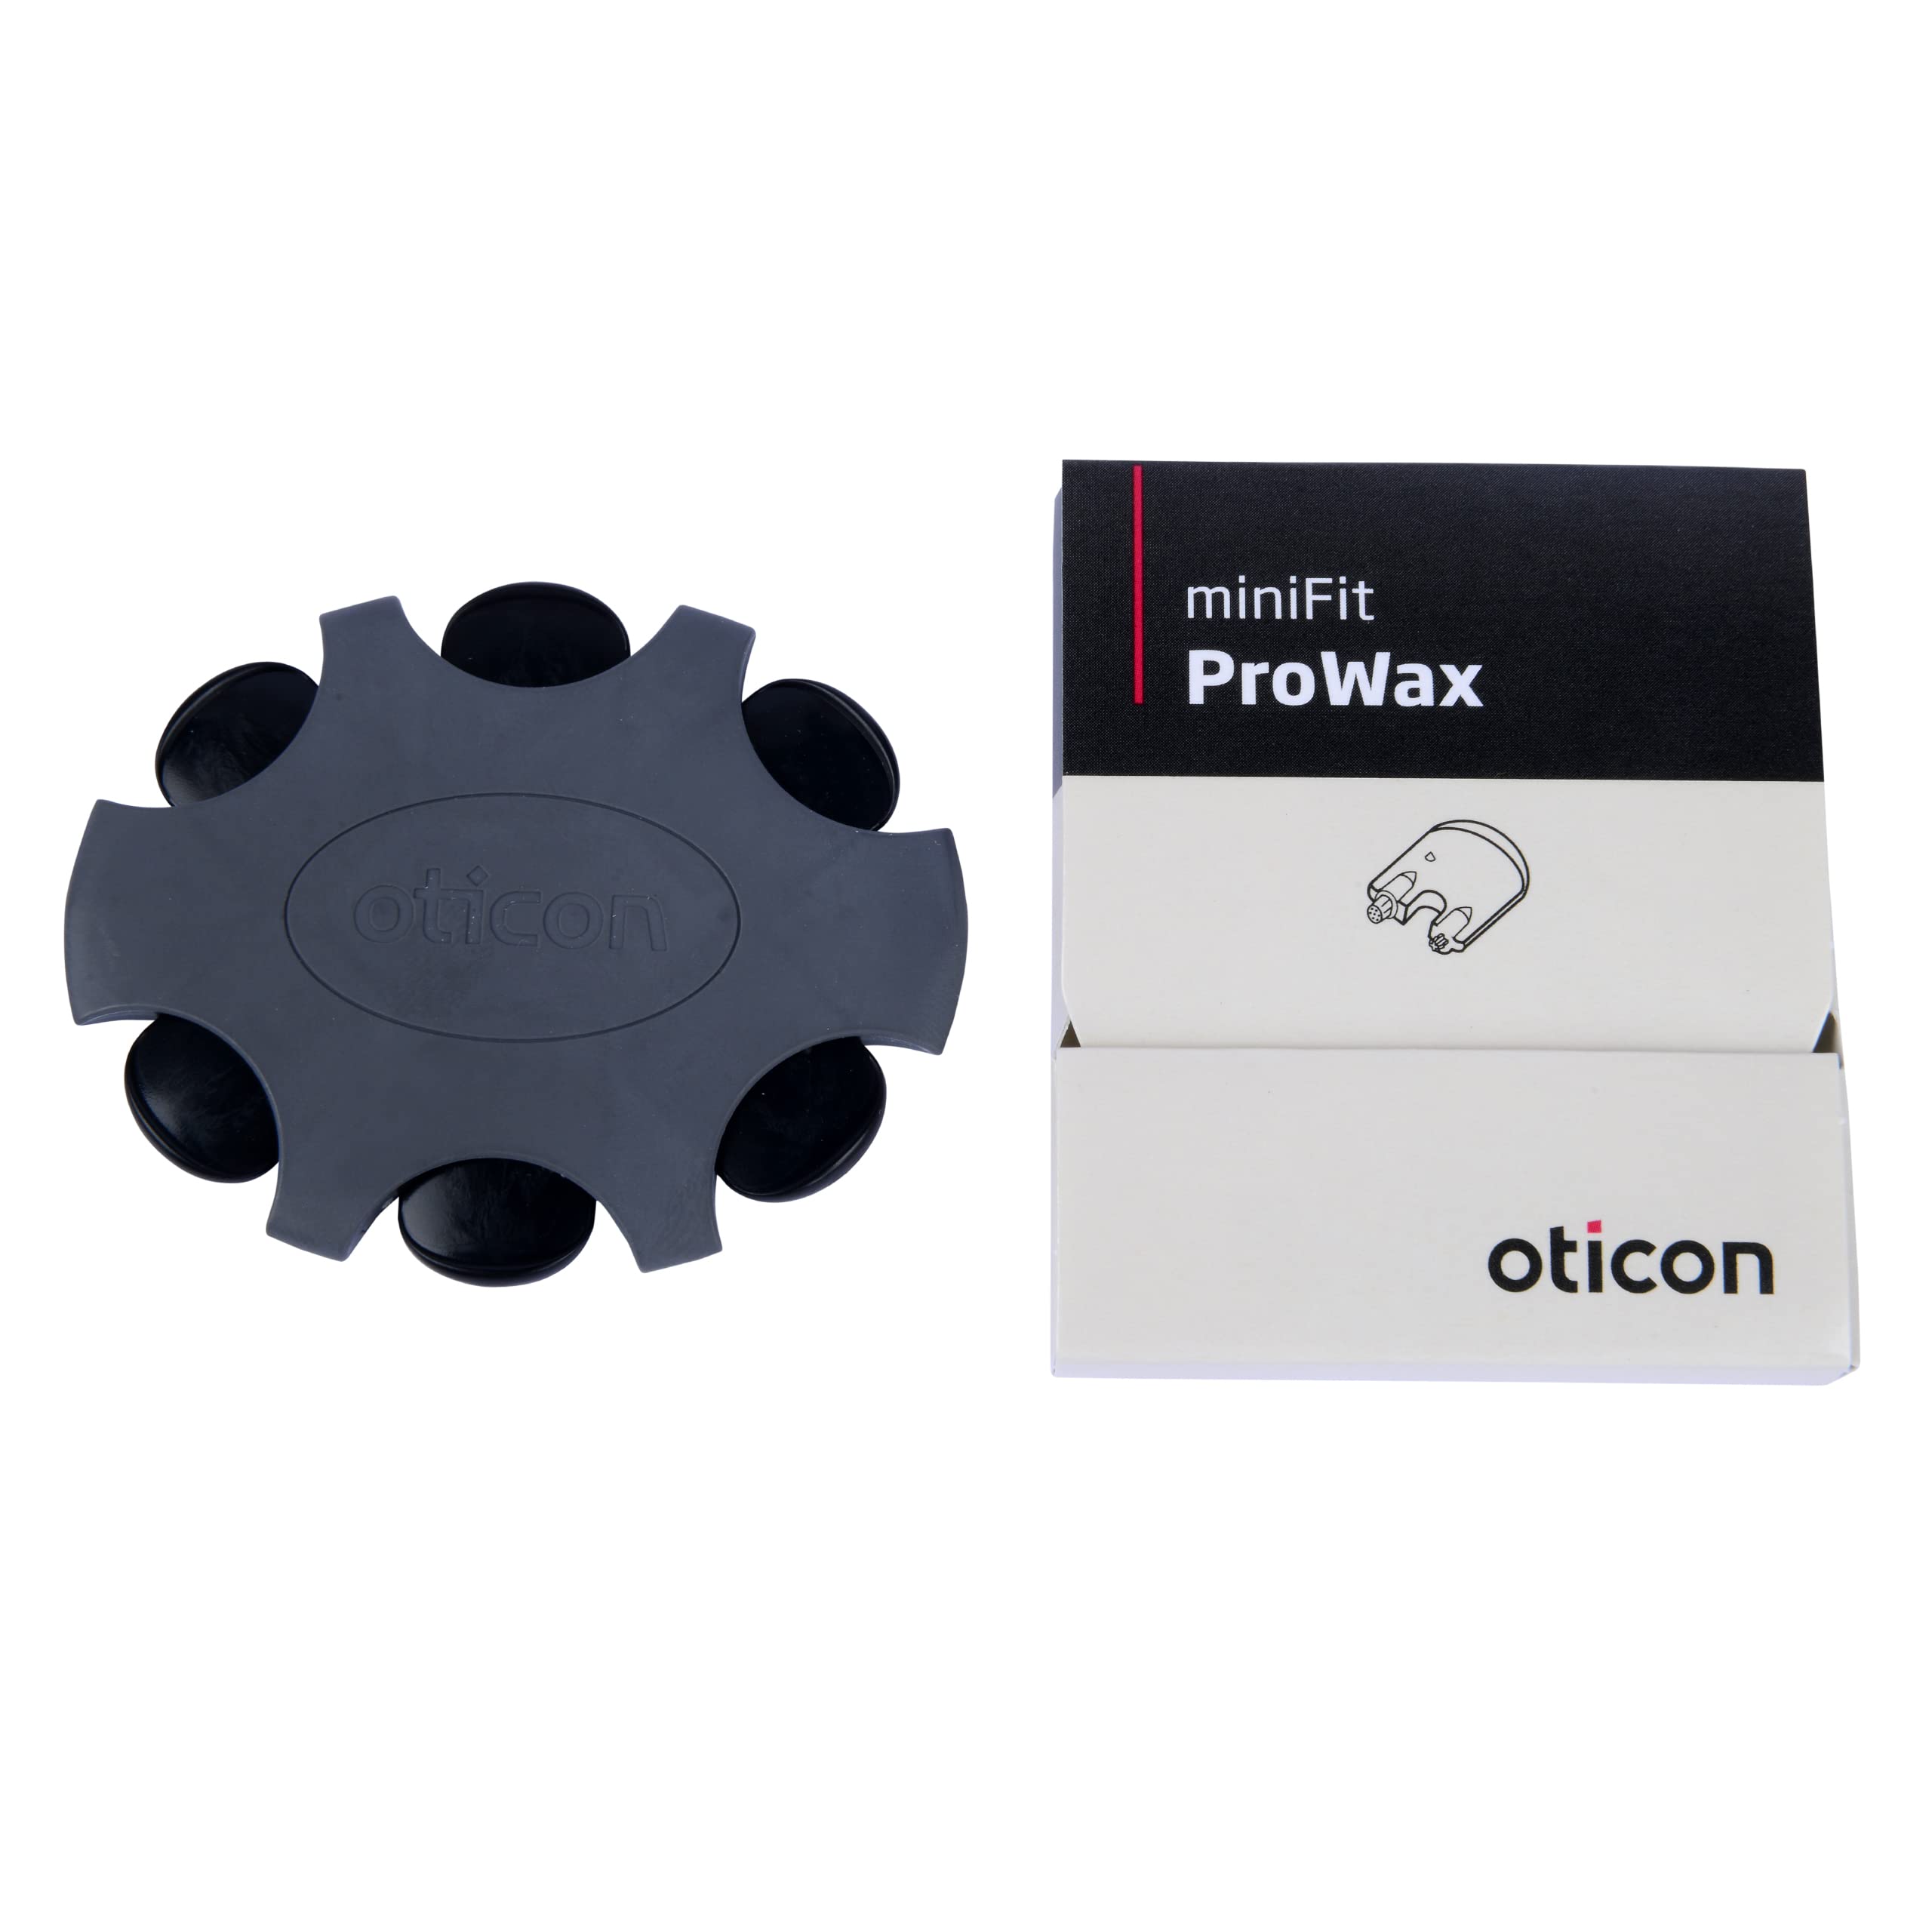 weigeren Geheugen Wiens Oticon Prowax Minifit Wax Filters replacements for hearing aids (1)